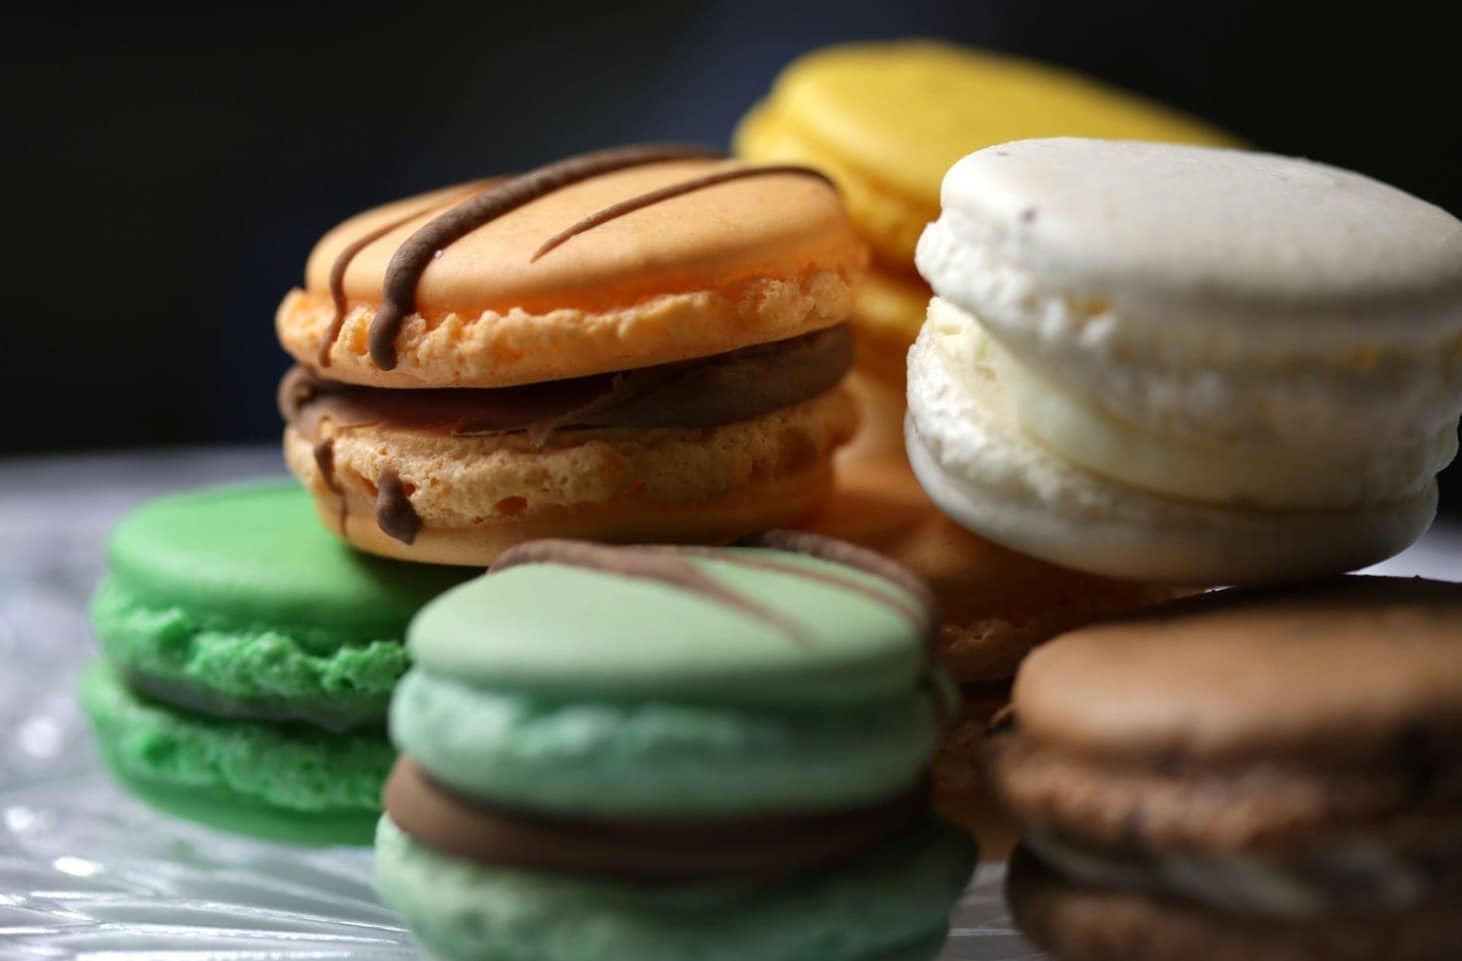 Are Macarons Healthy?